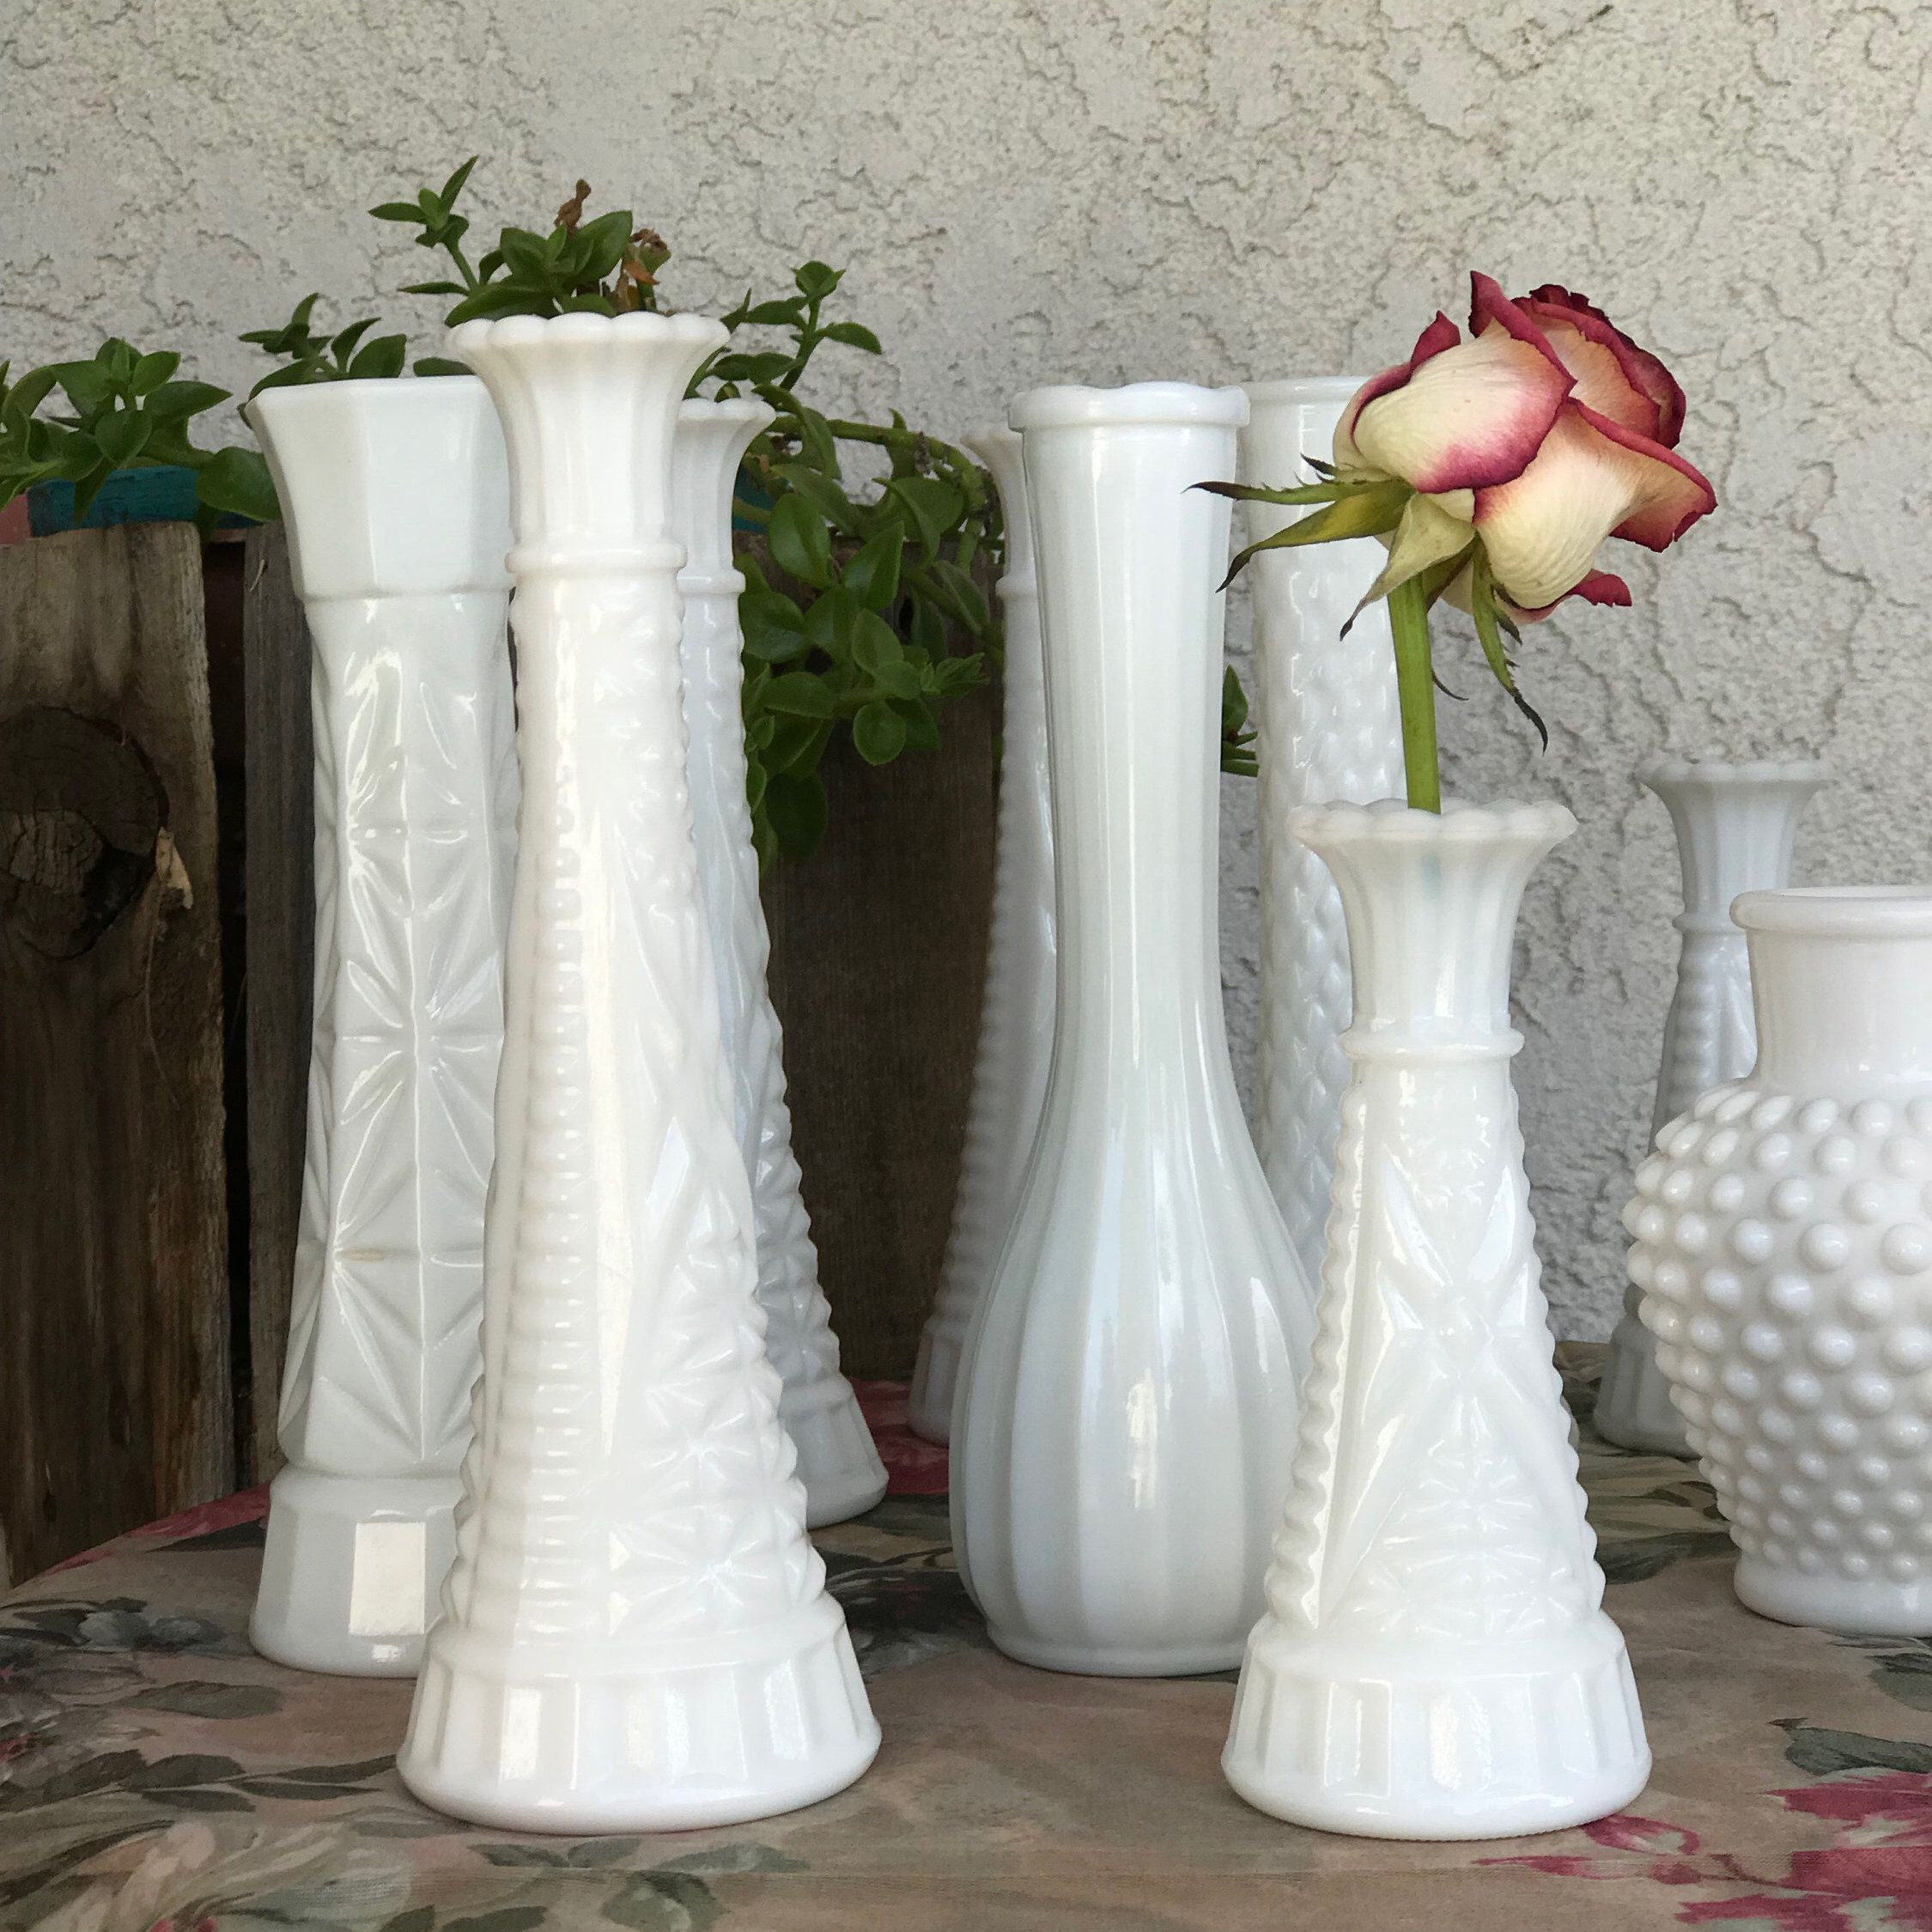 13 Cute White Milk Glass Bud Vases 2024 free download white milk glass bud vases of excited to share the latest addition to my etsy shop vintage milk intended for excited to share the latest addition to my etsy shop vintage milk white vases